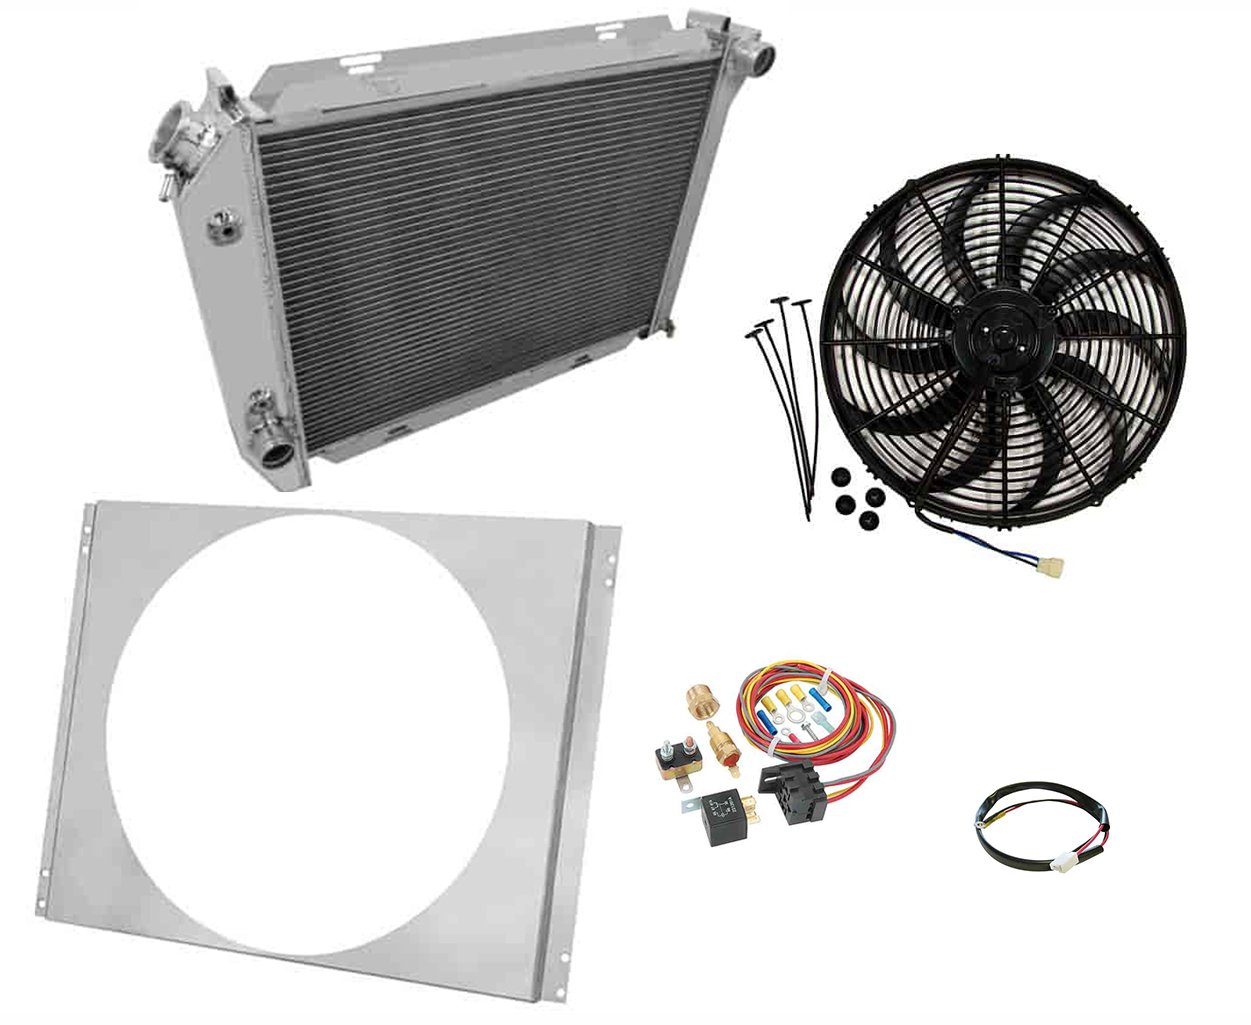 CC385 All-Aluminum Radiator System Kit for Select 1967-1968 Ford, Mercury Vehicles